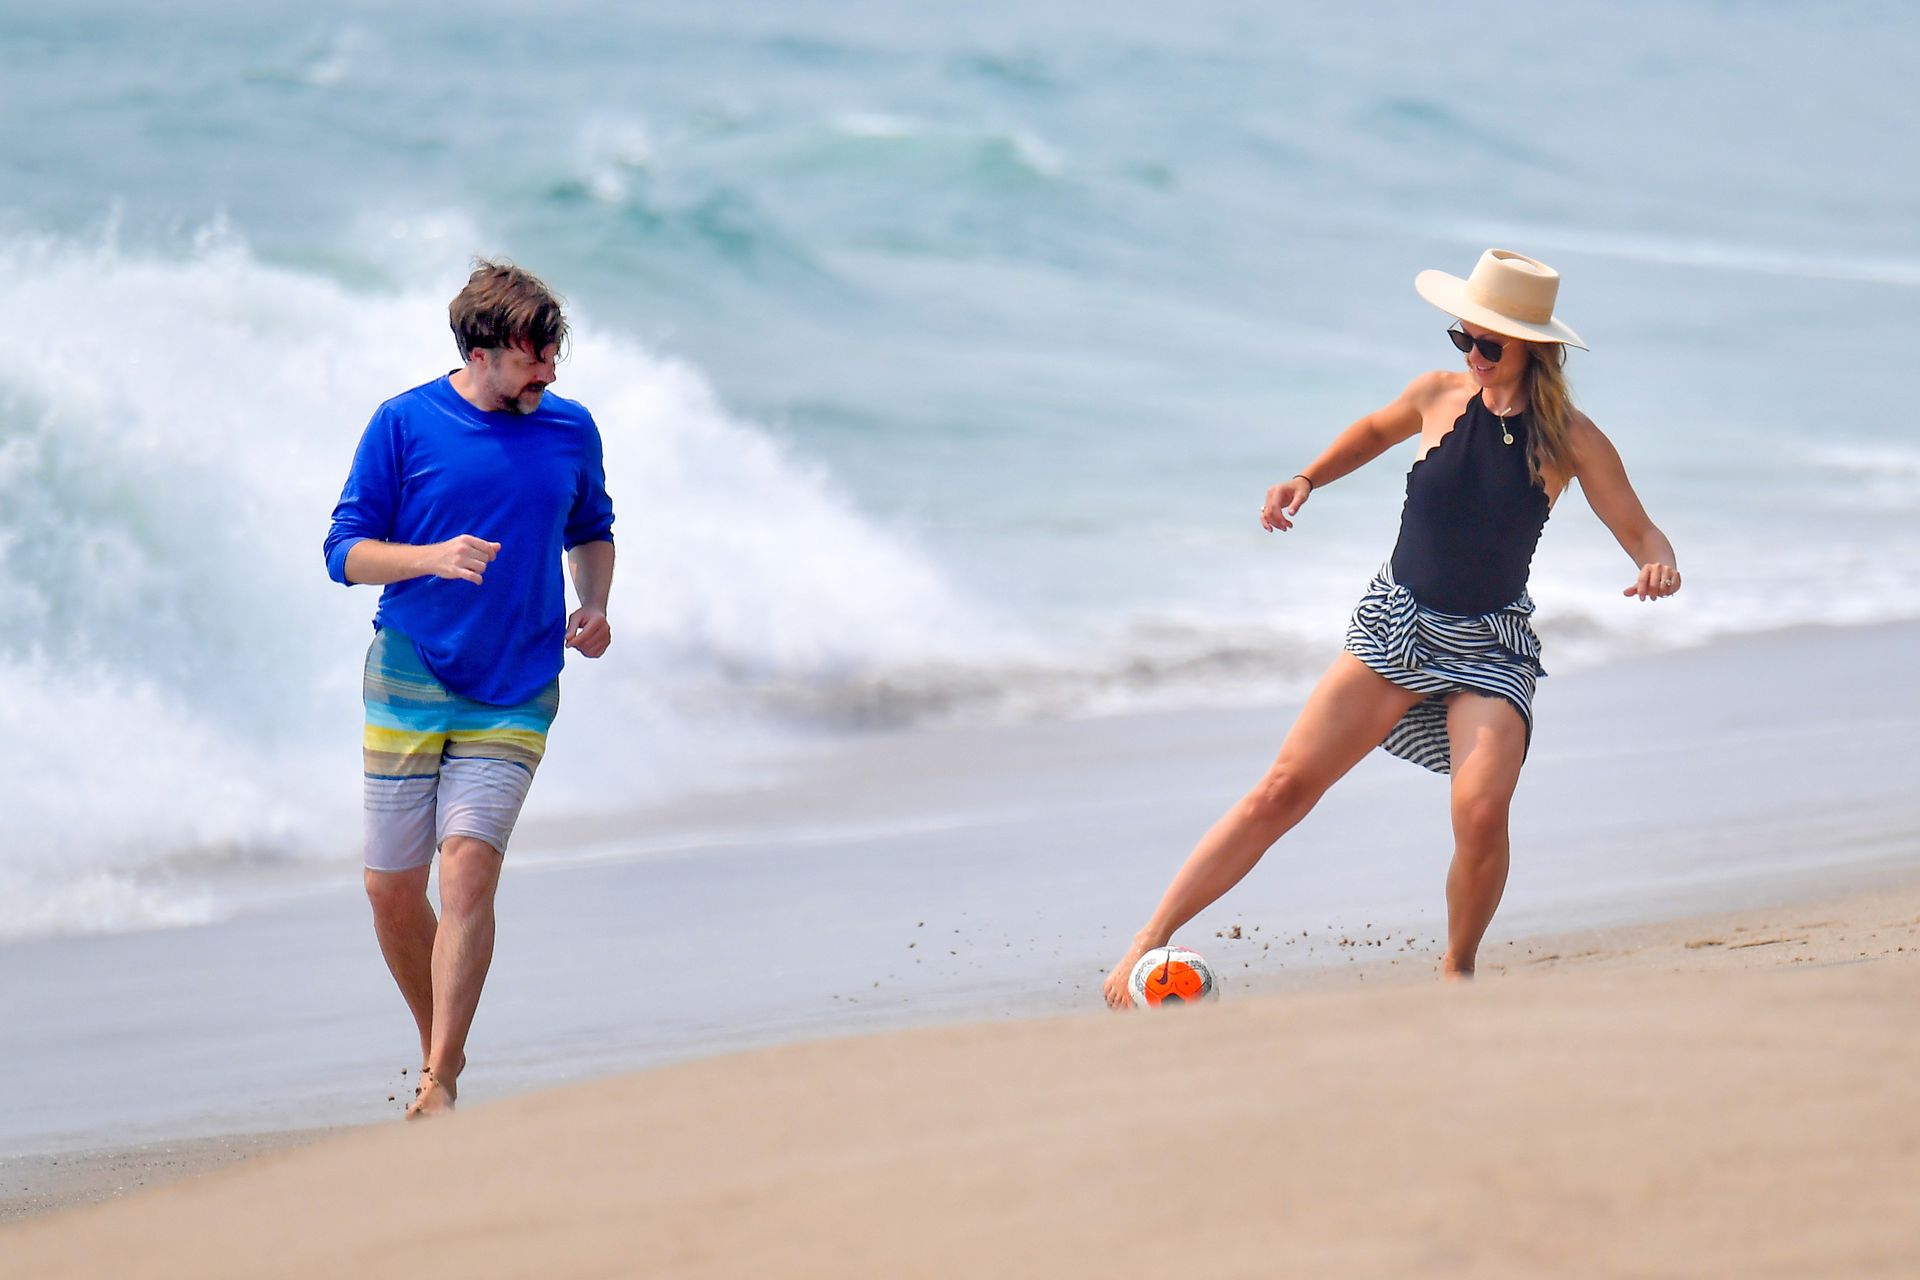 olivia wilde looks incredible as she plays on the beach with jason sudeikis 6